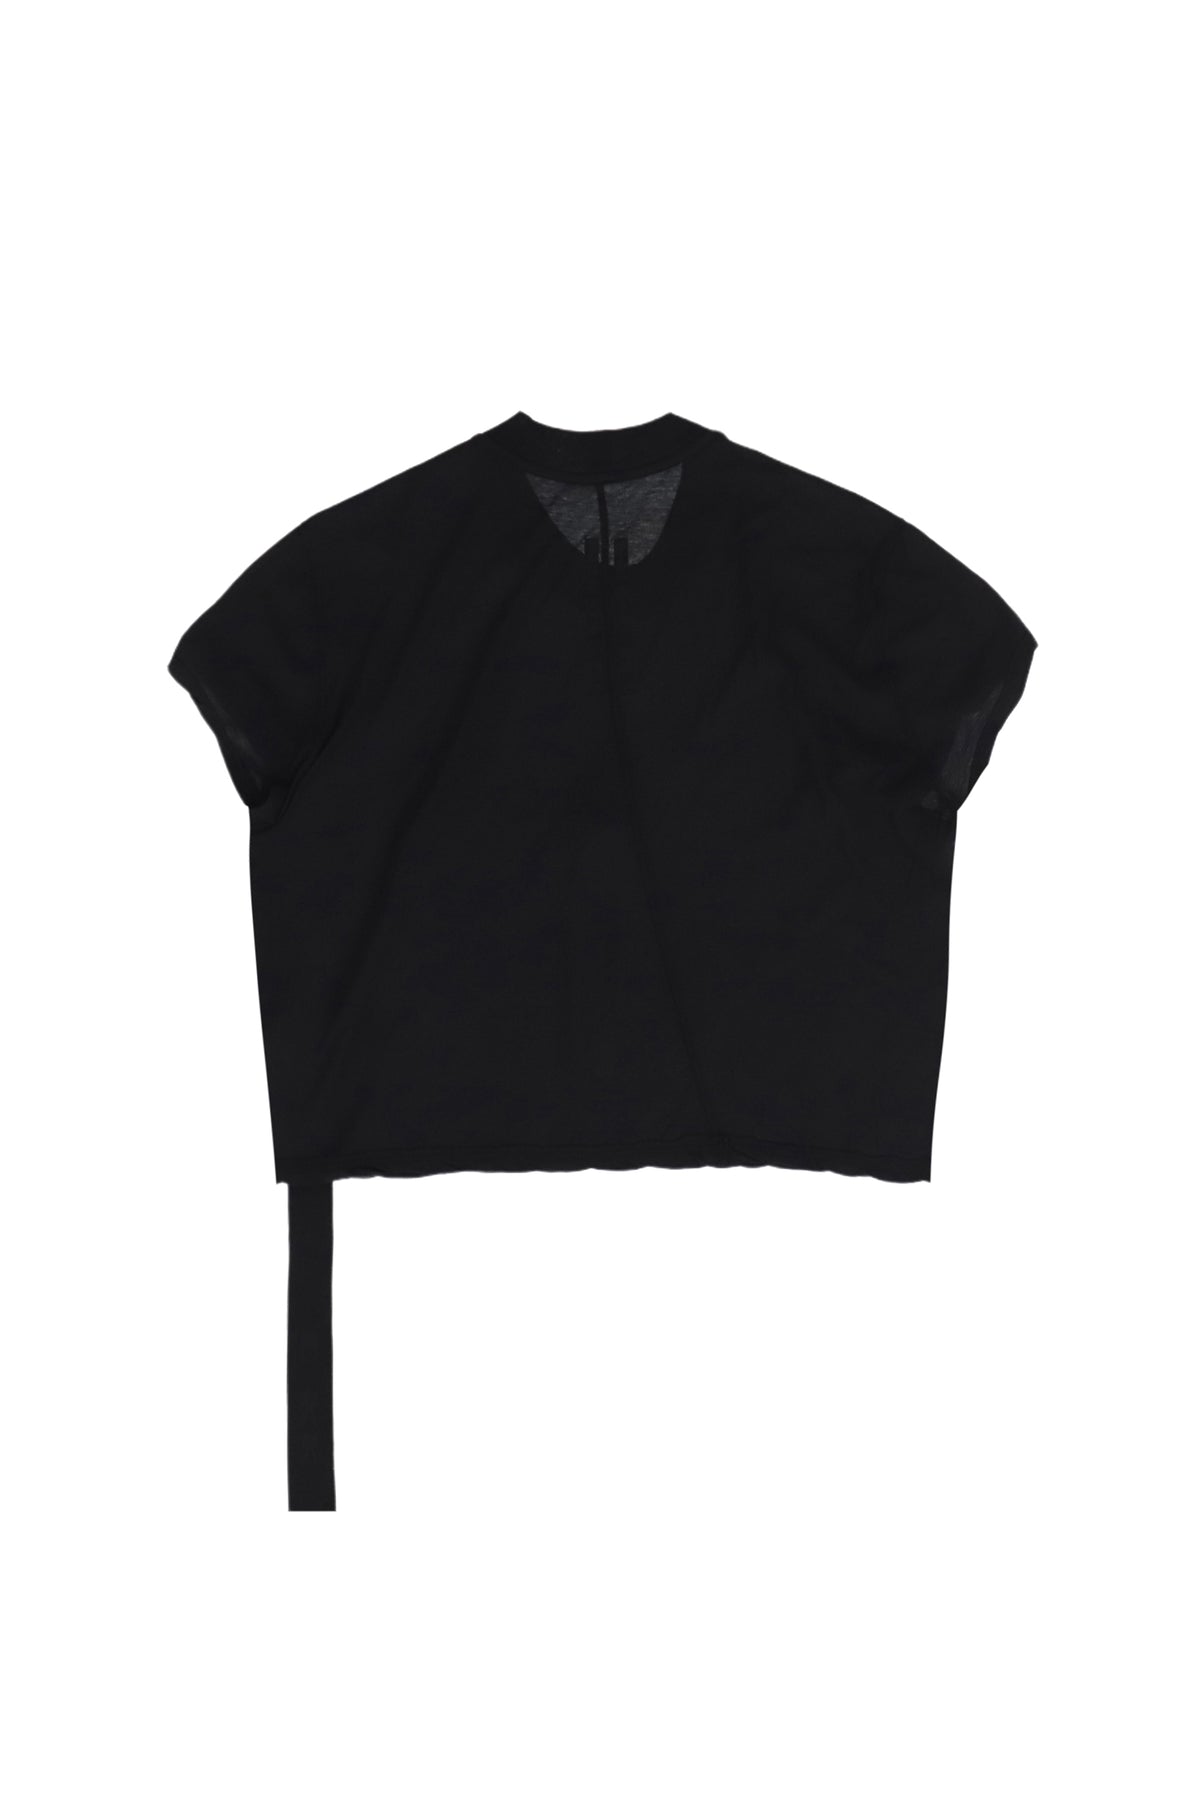 CROPPED SMALL LEVEL T / BLK